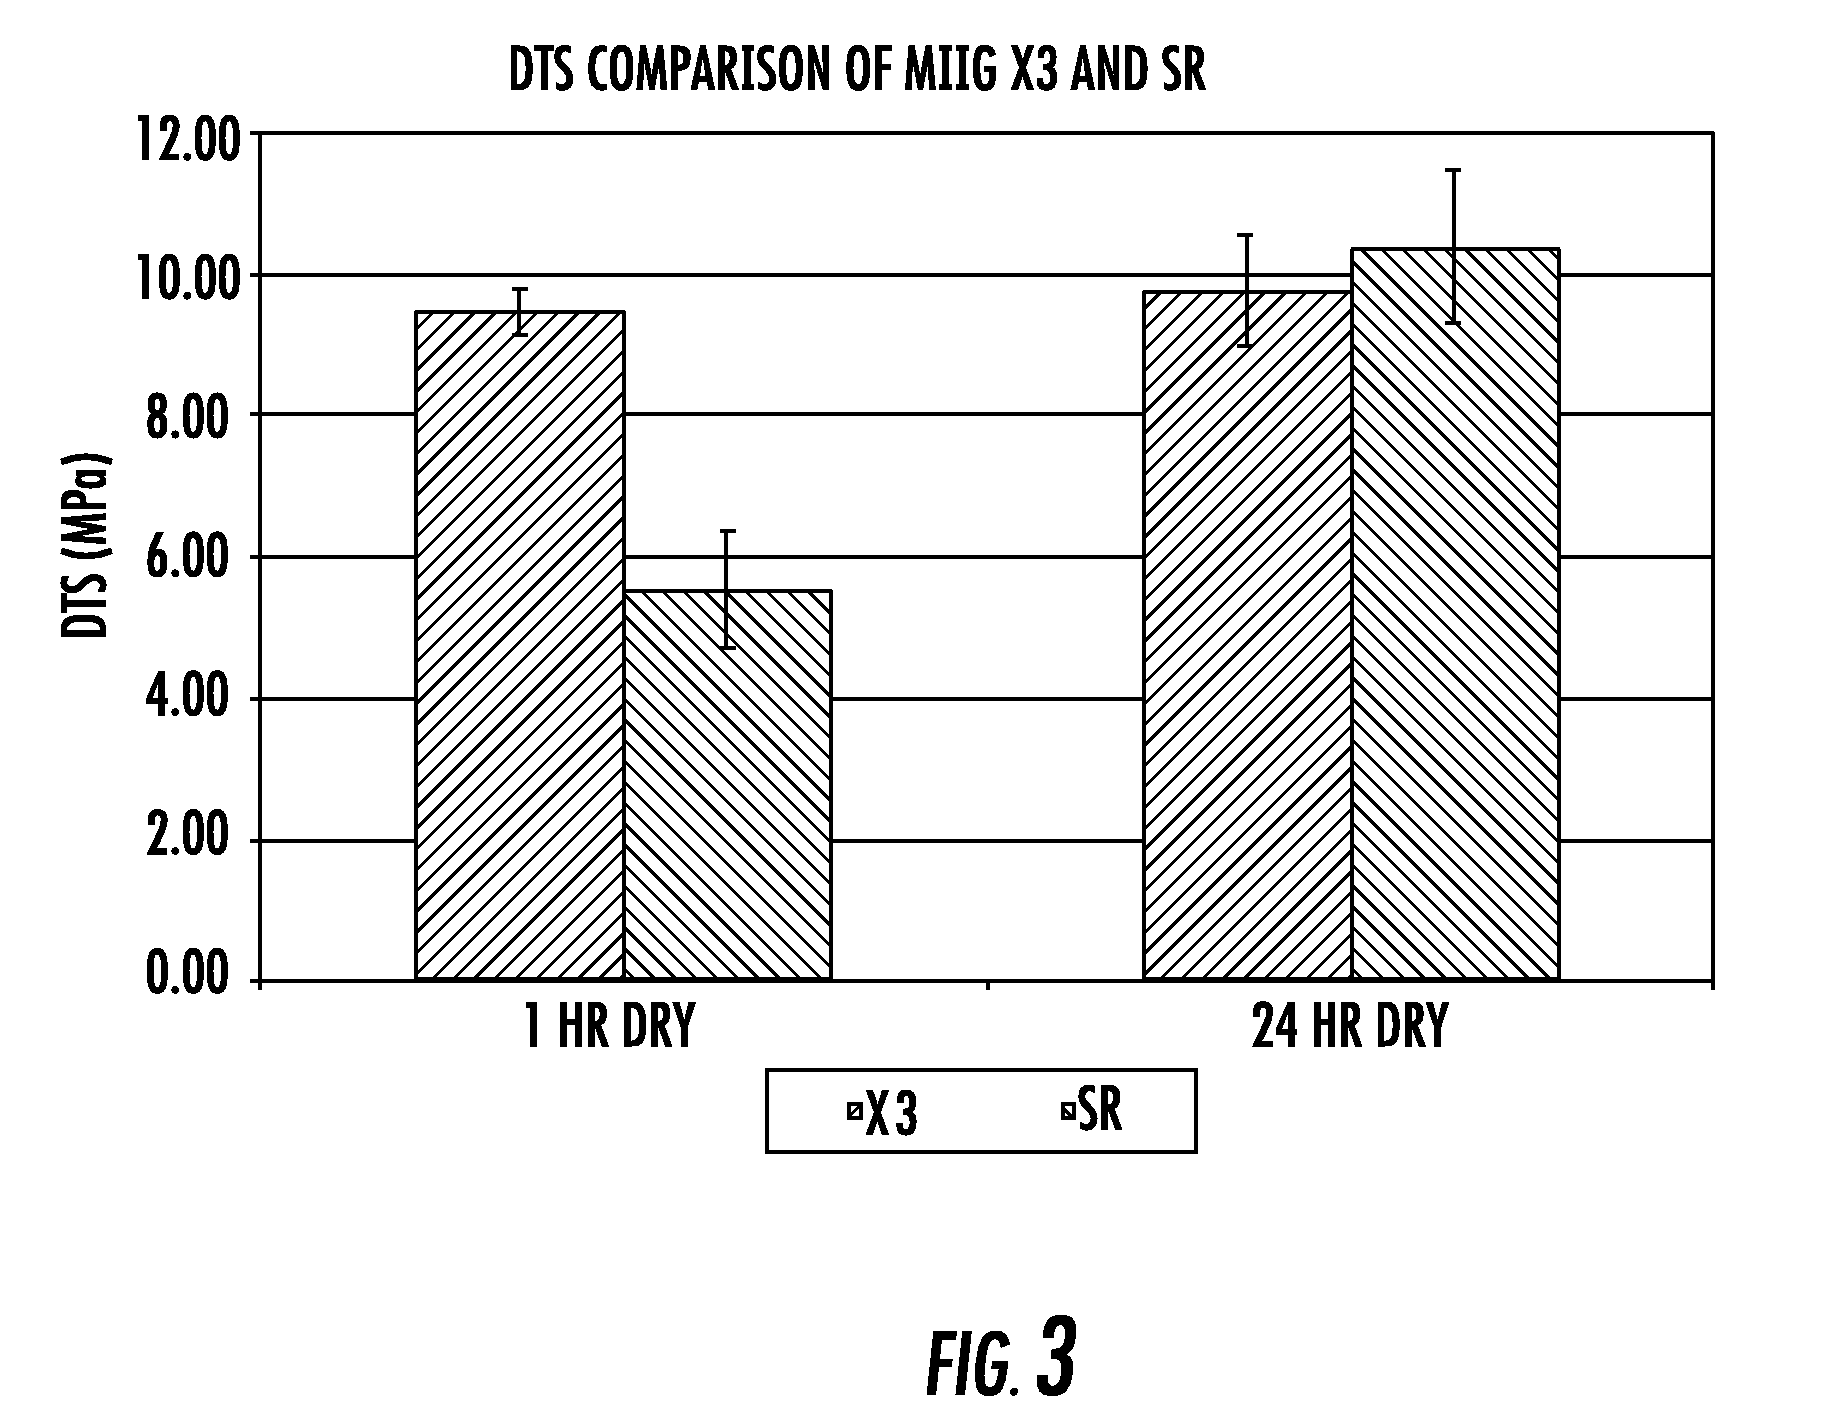 Composite bone graft substitute cement and articles produced therefrom